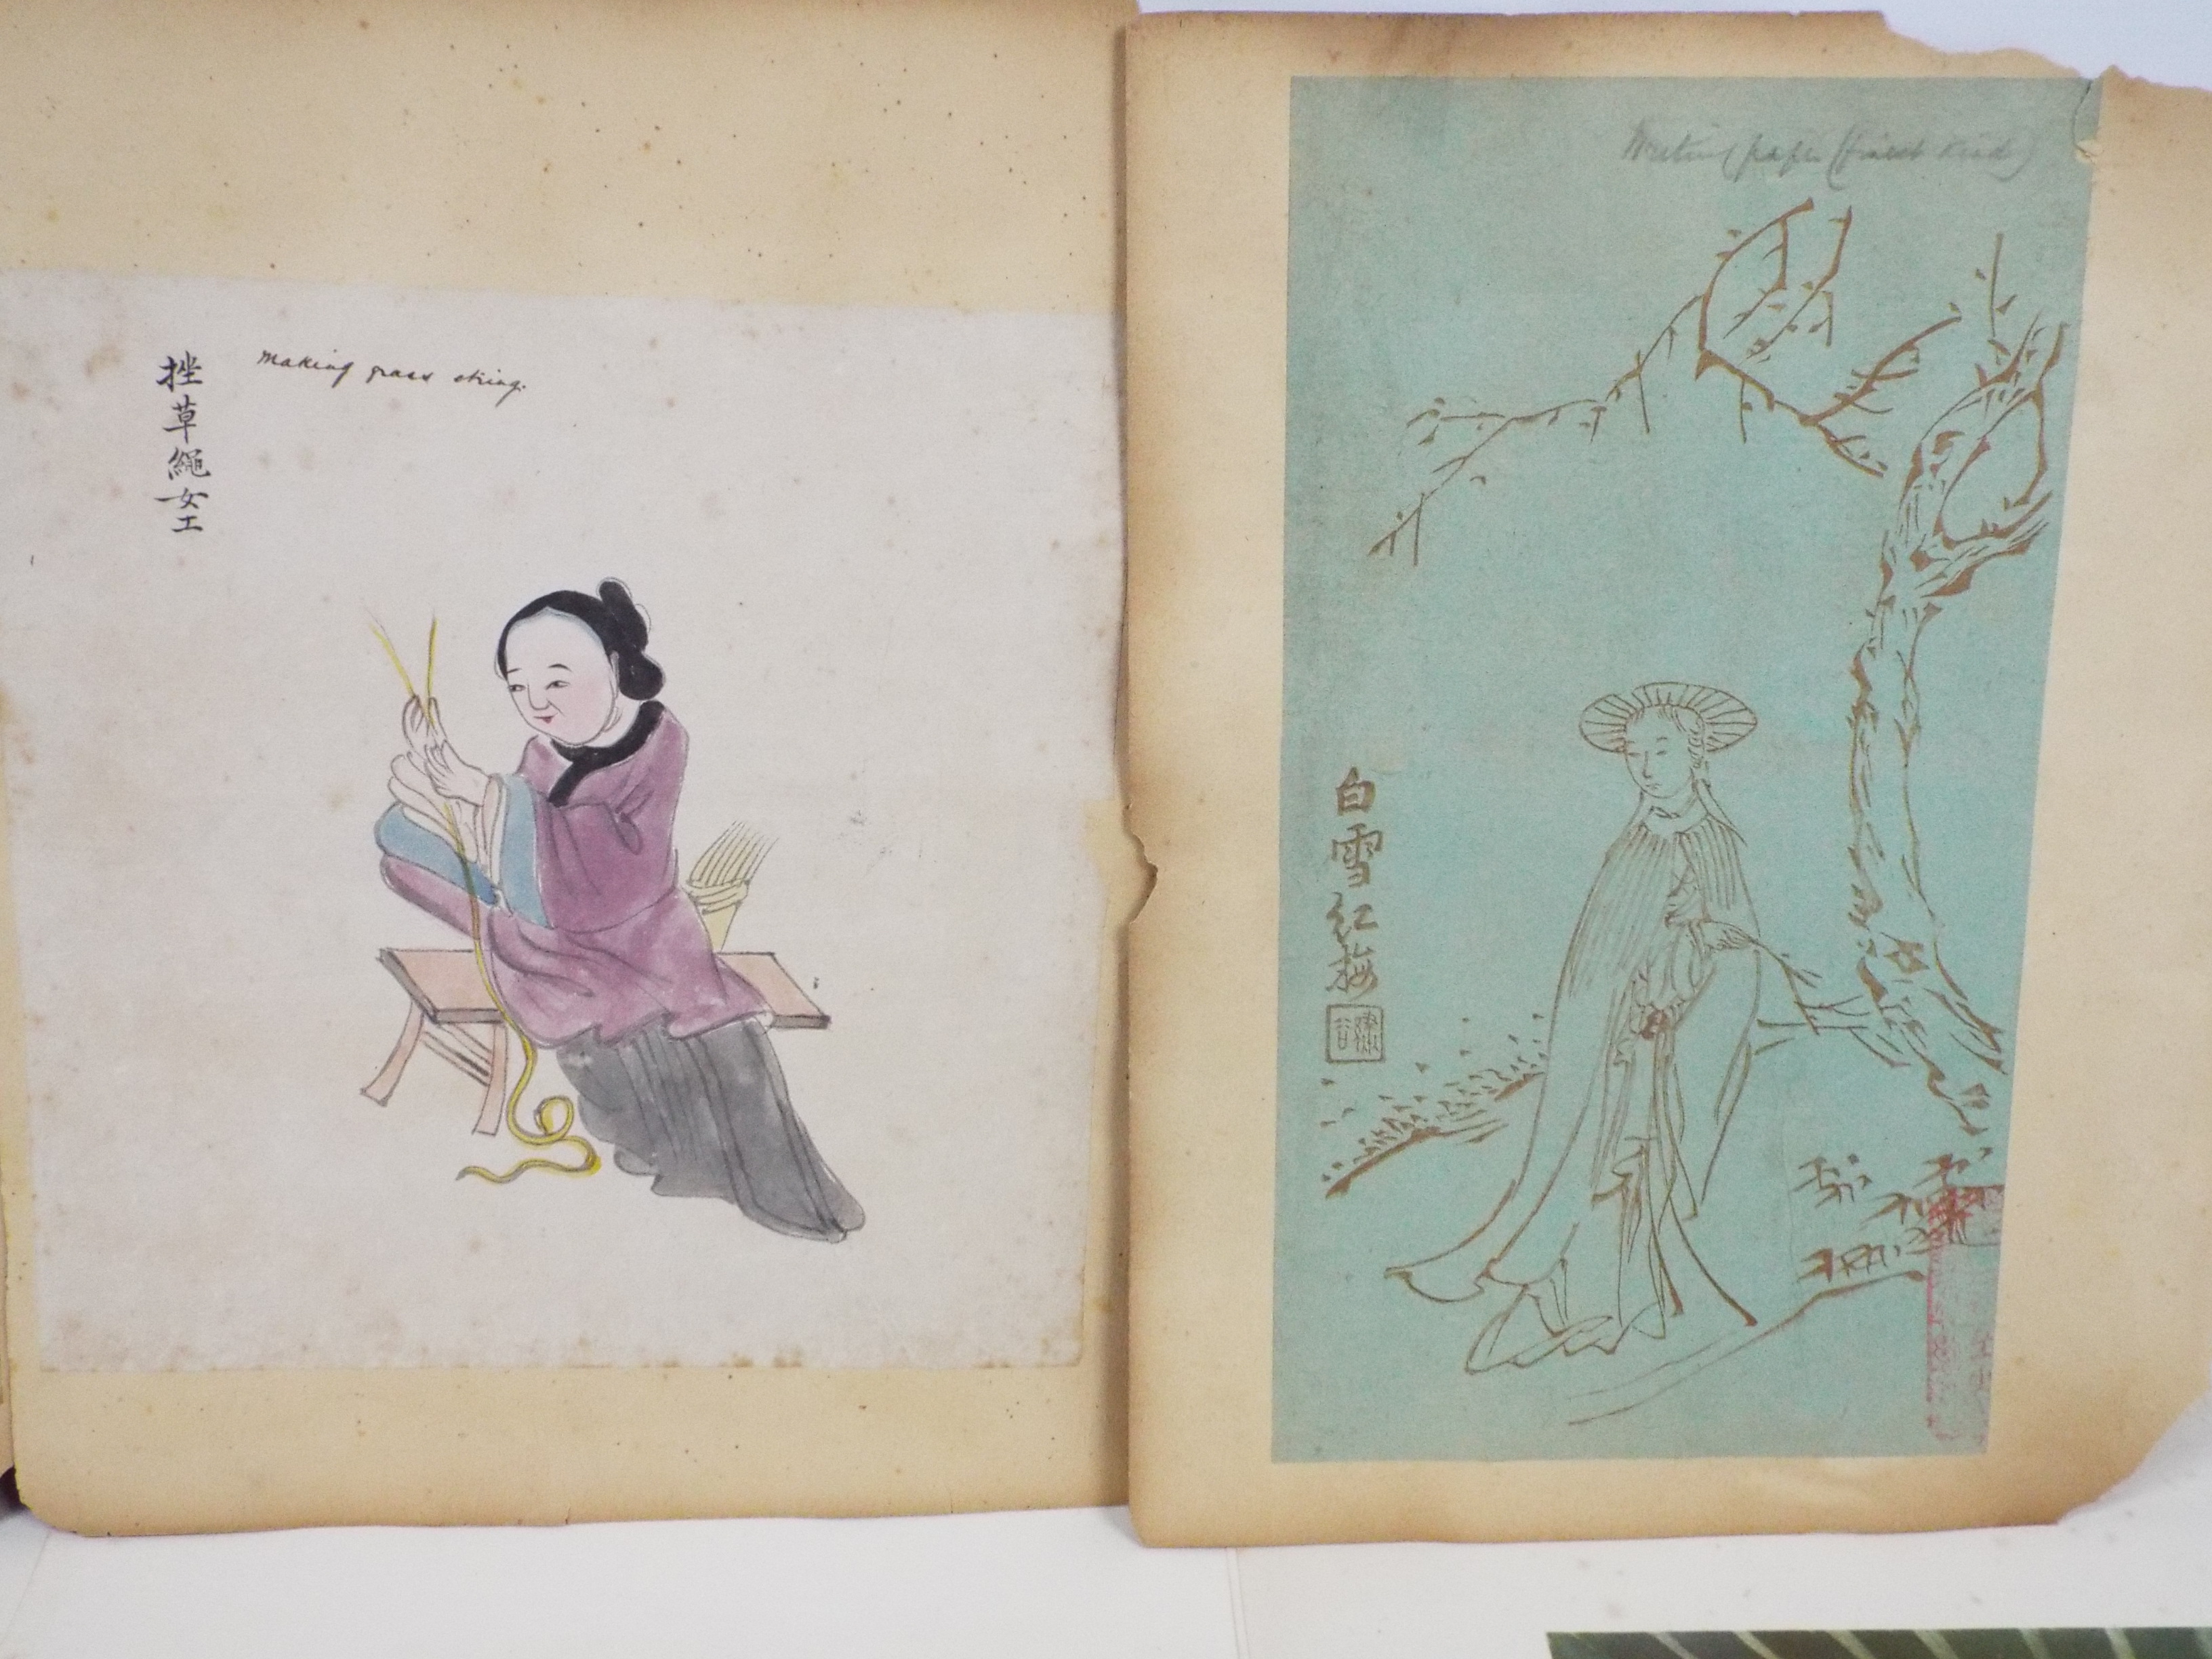 Five vintage Oriental pictures, ink and watercolour, each approximately 18 cm x 18 cm image size, - Image 5 of 11